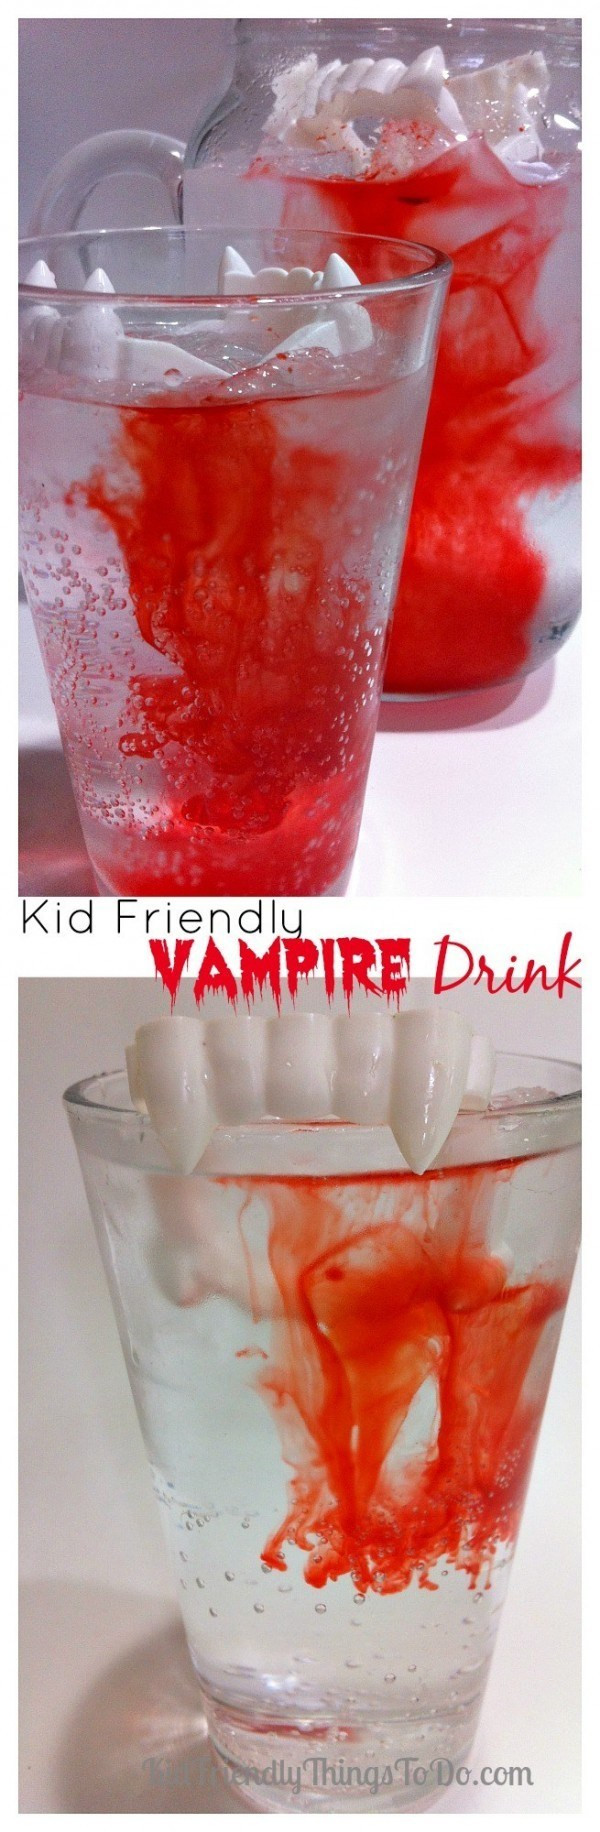 Halloween Party Drinks For Kids
 Halloween Drinks For The Kids – Party Ideas